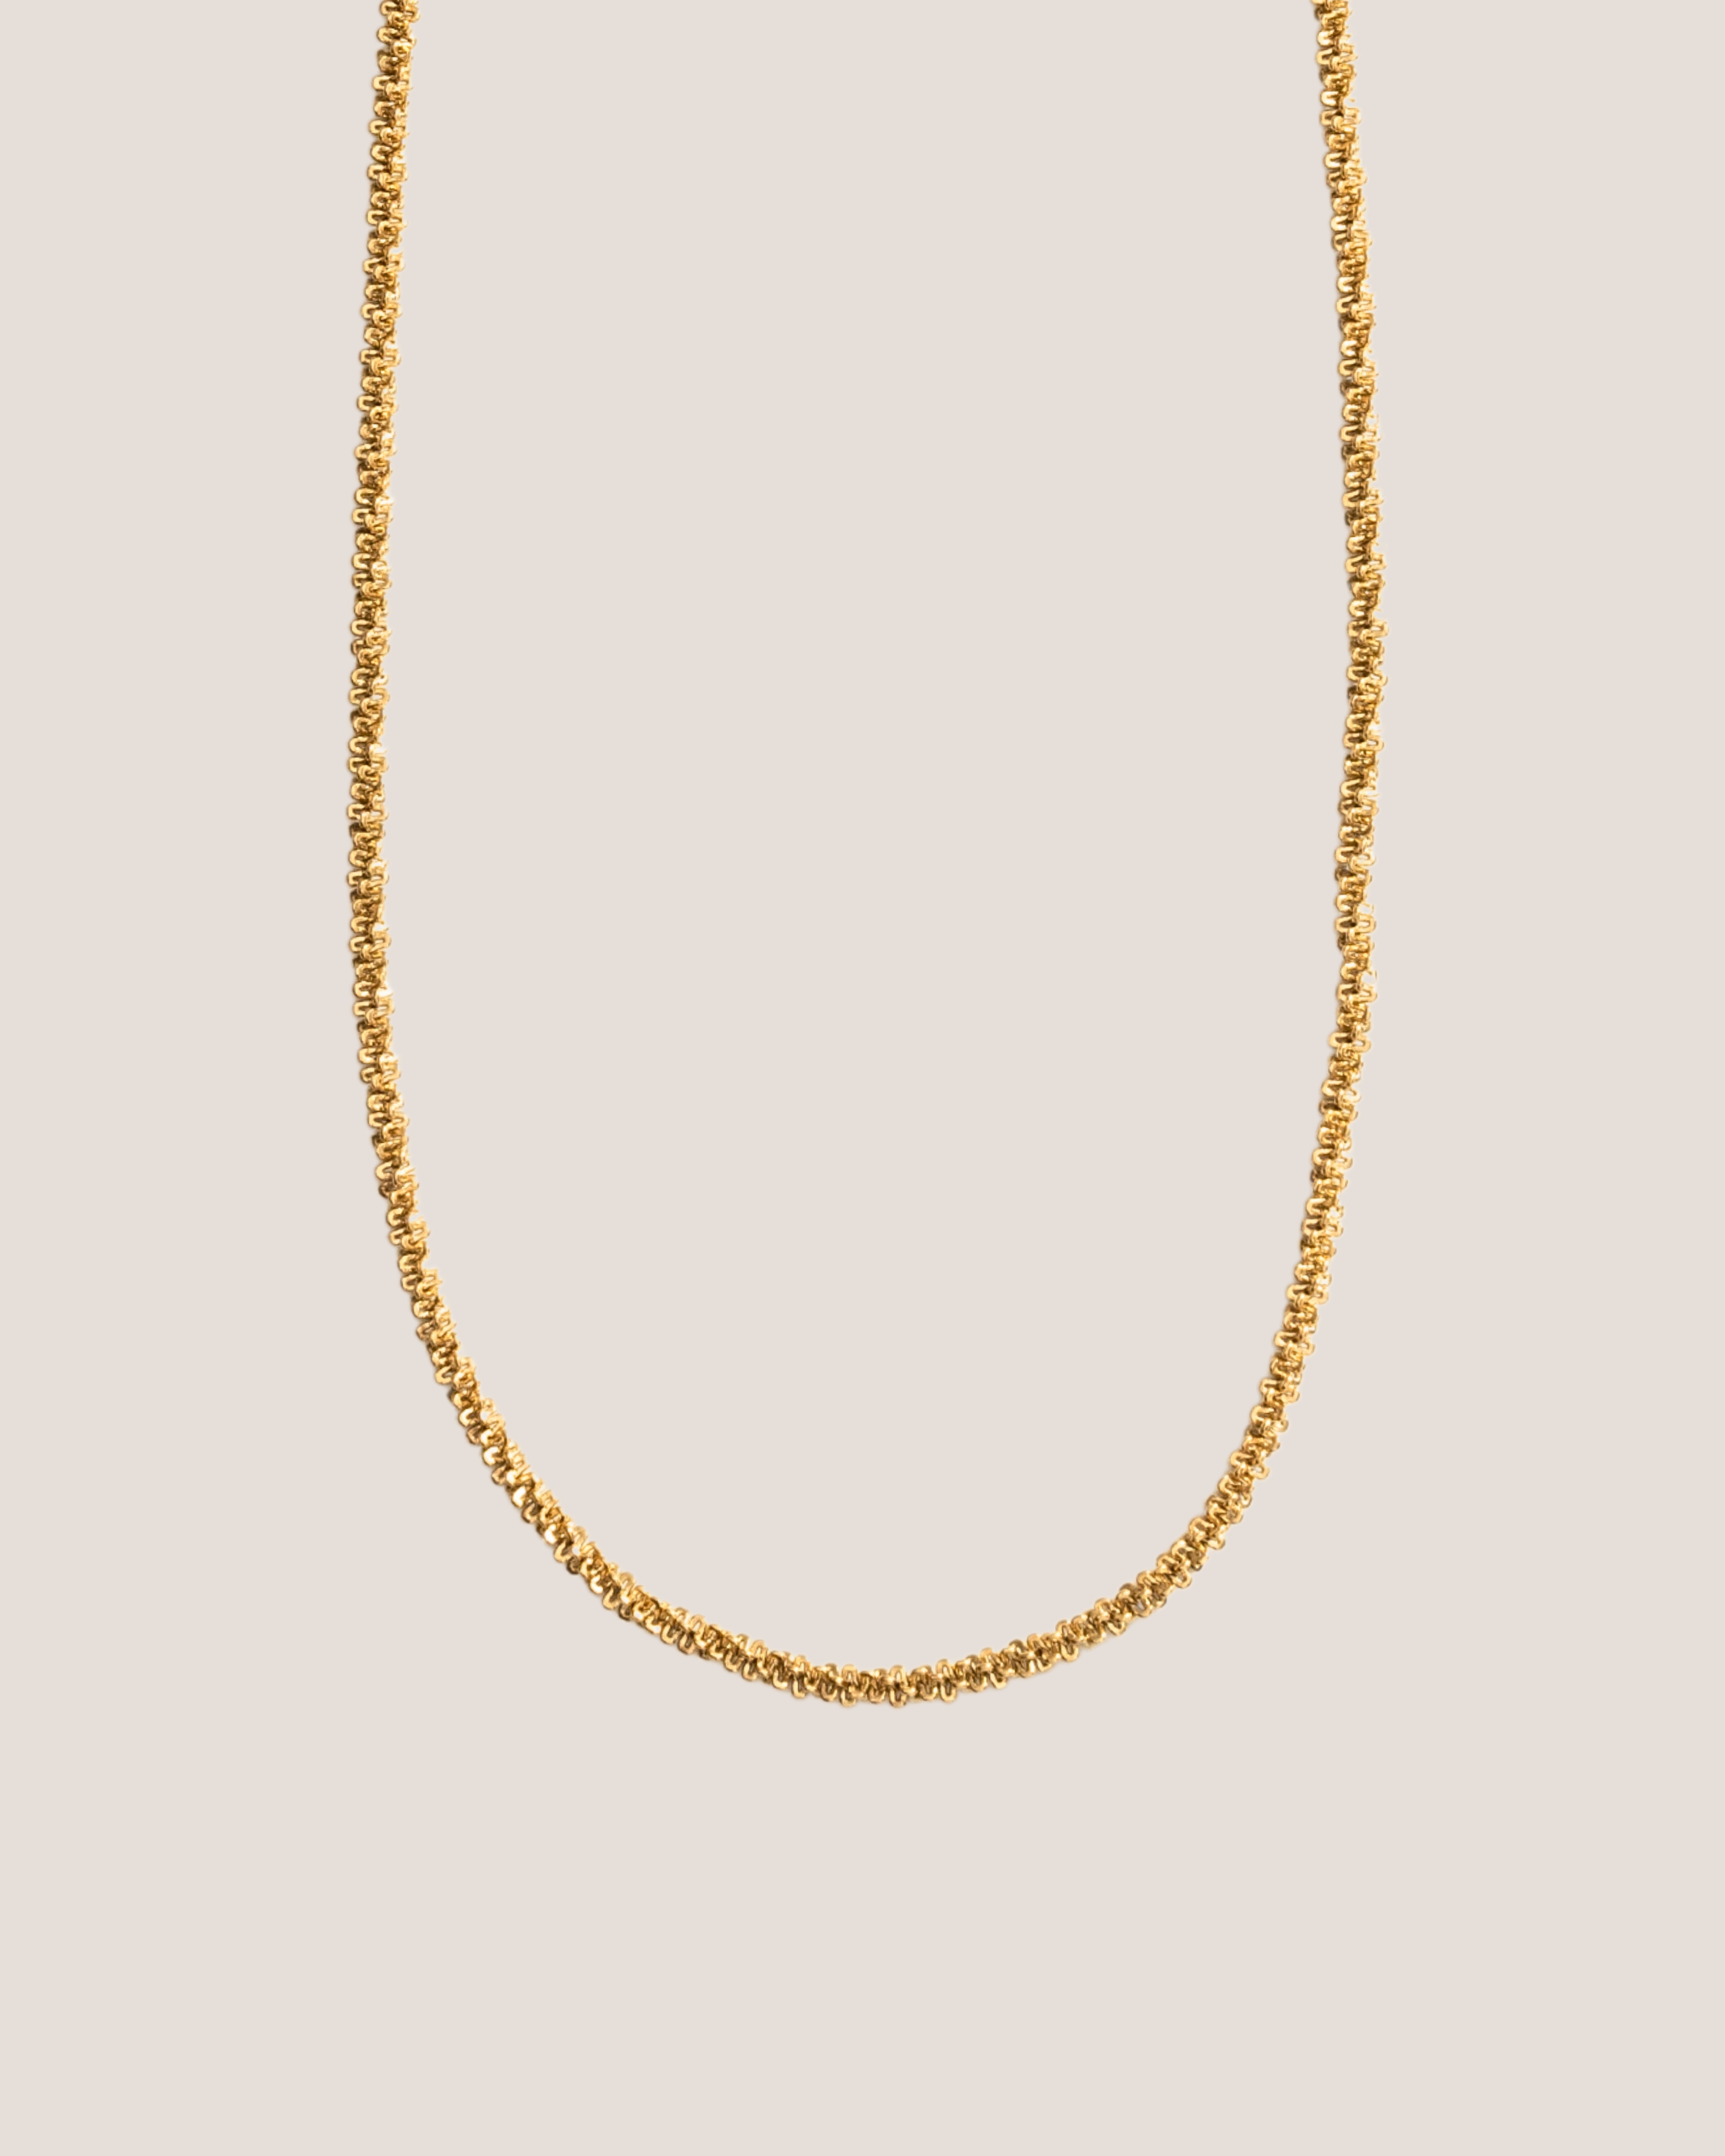 Tweed Gold Chain Necklace